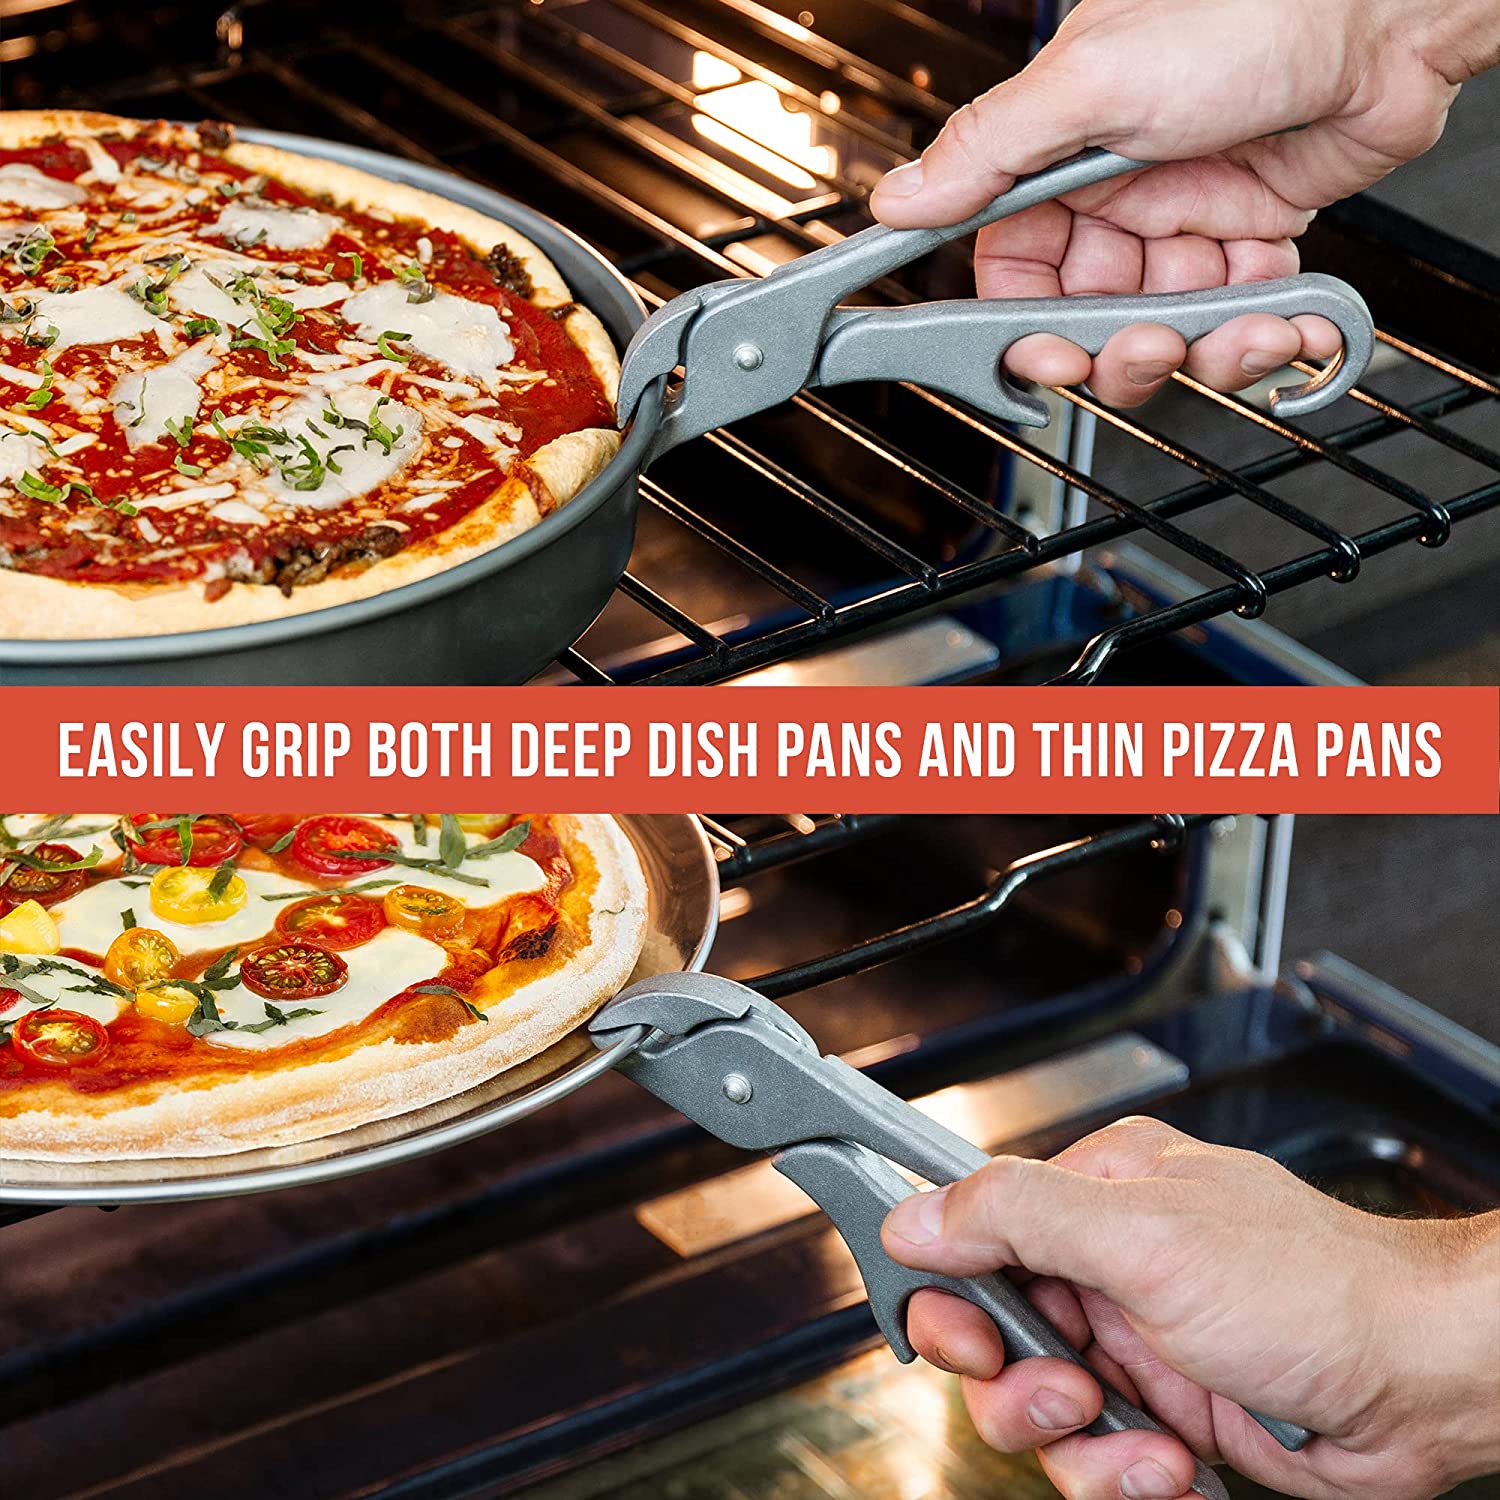 1pc Aluminum Alloy Pizza Pan Gripper Anti-scald Oven Clamp Pliers Plate  Grabber